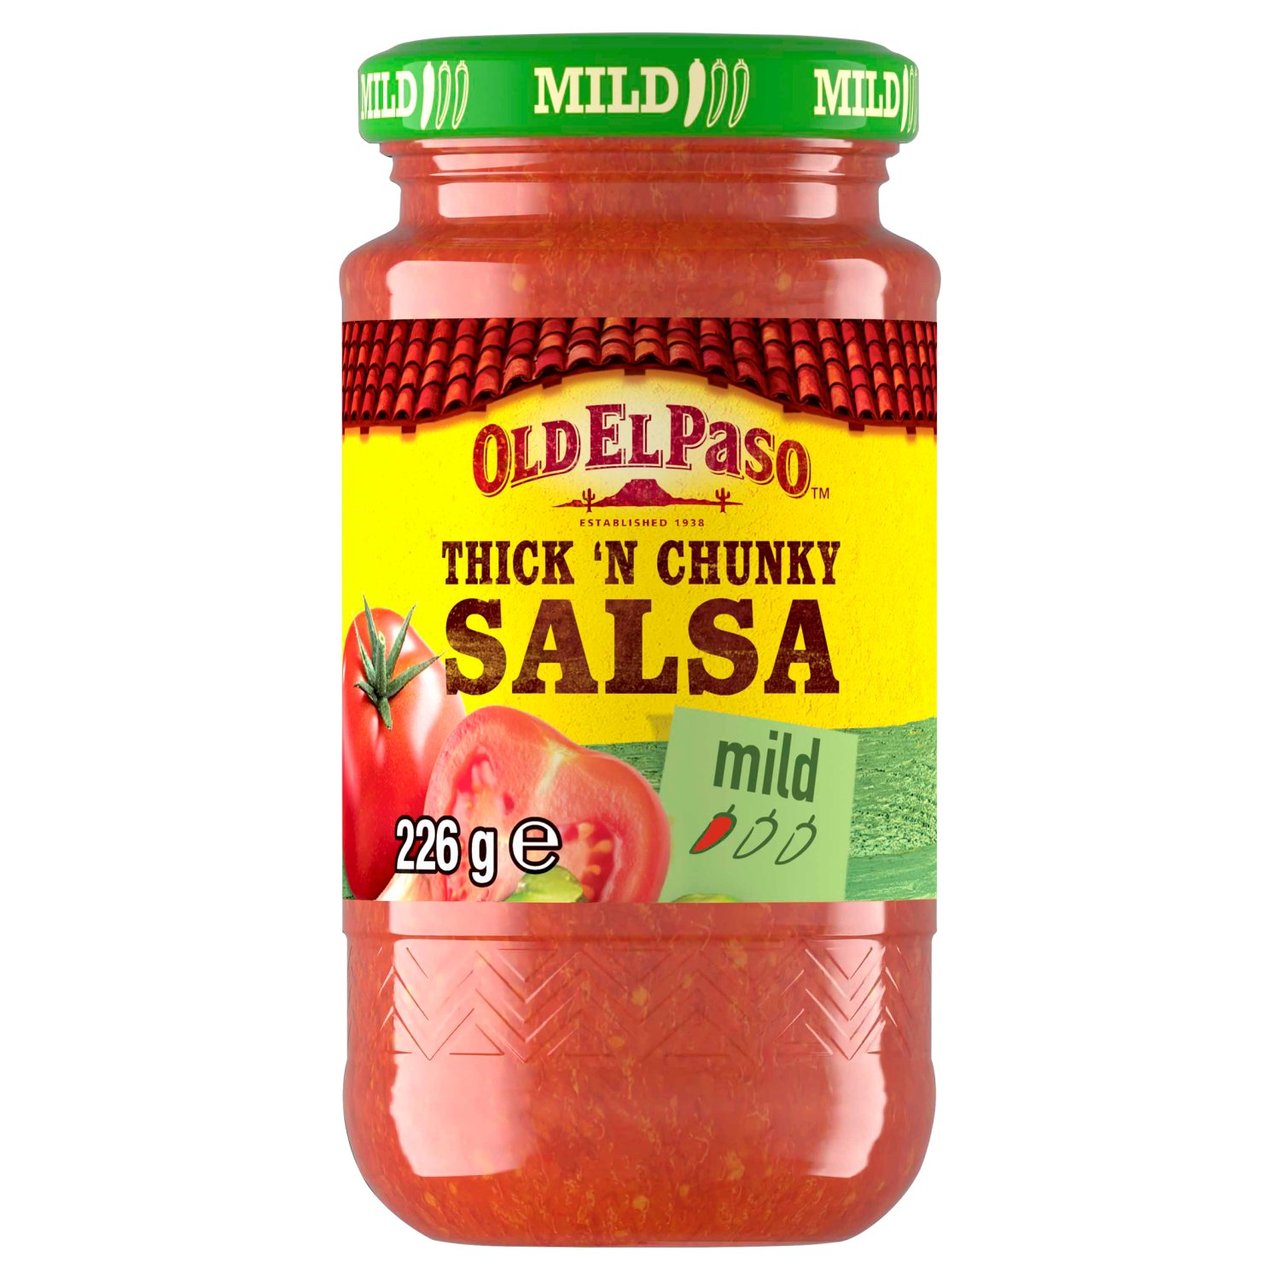 OLD EL PASO THICK 'N CHUNKY MILD SALSA 226G